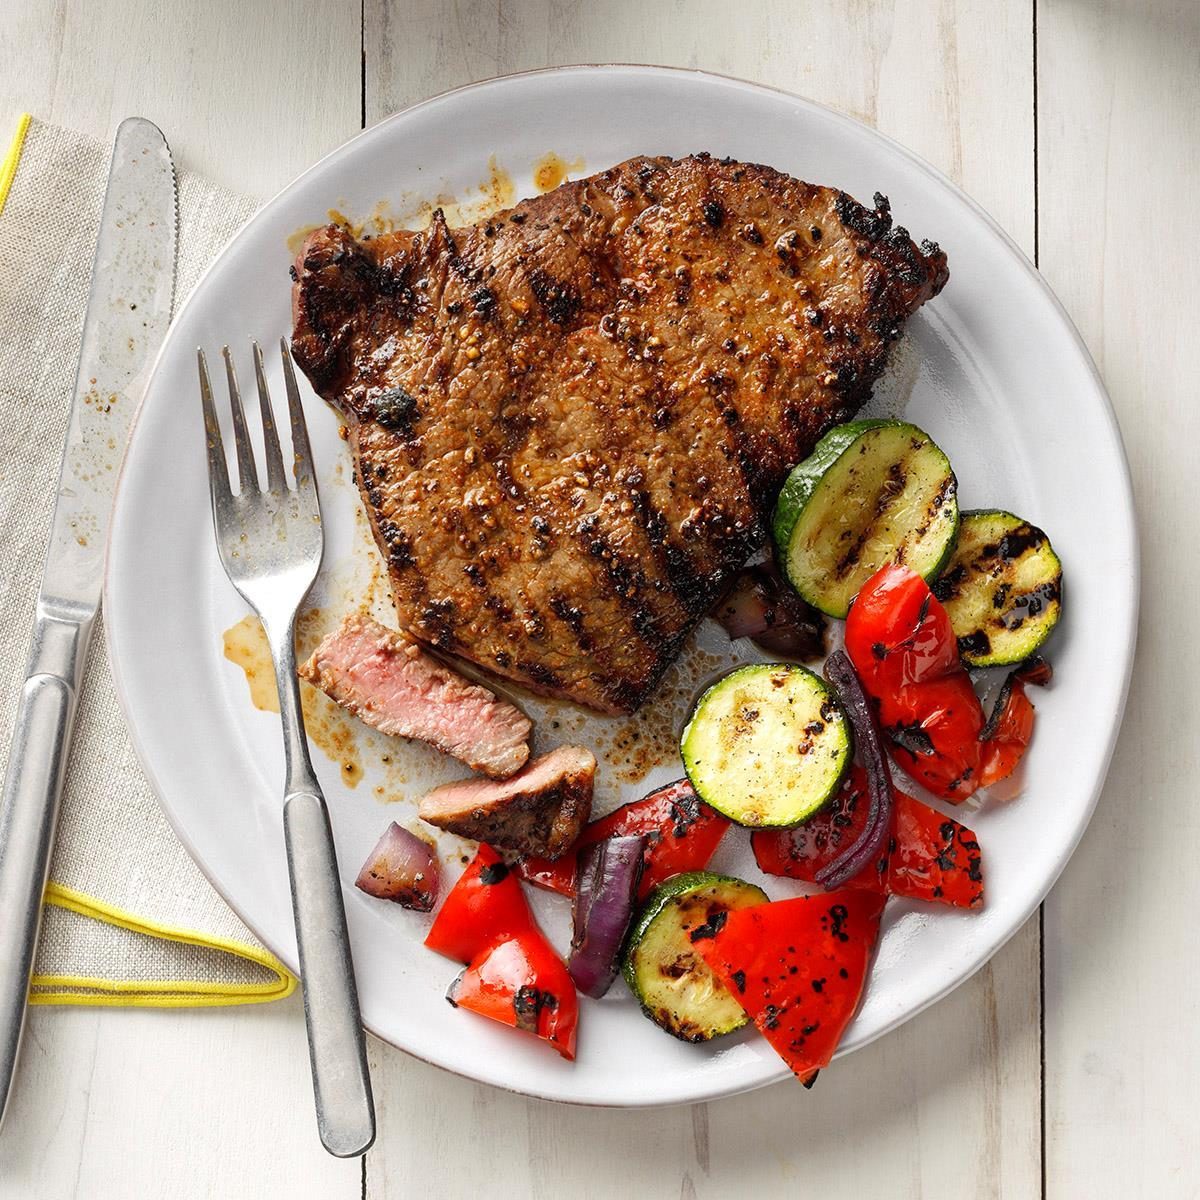 Grilled Sirloin Steak Recipe: How to Make It